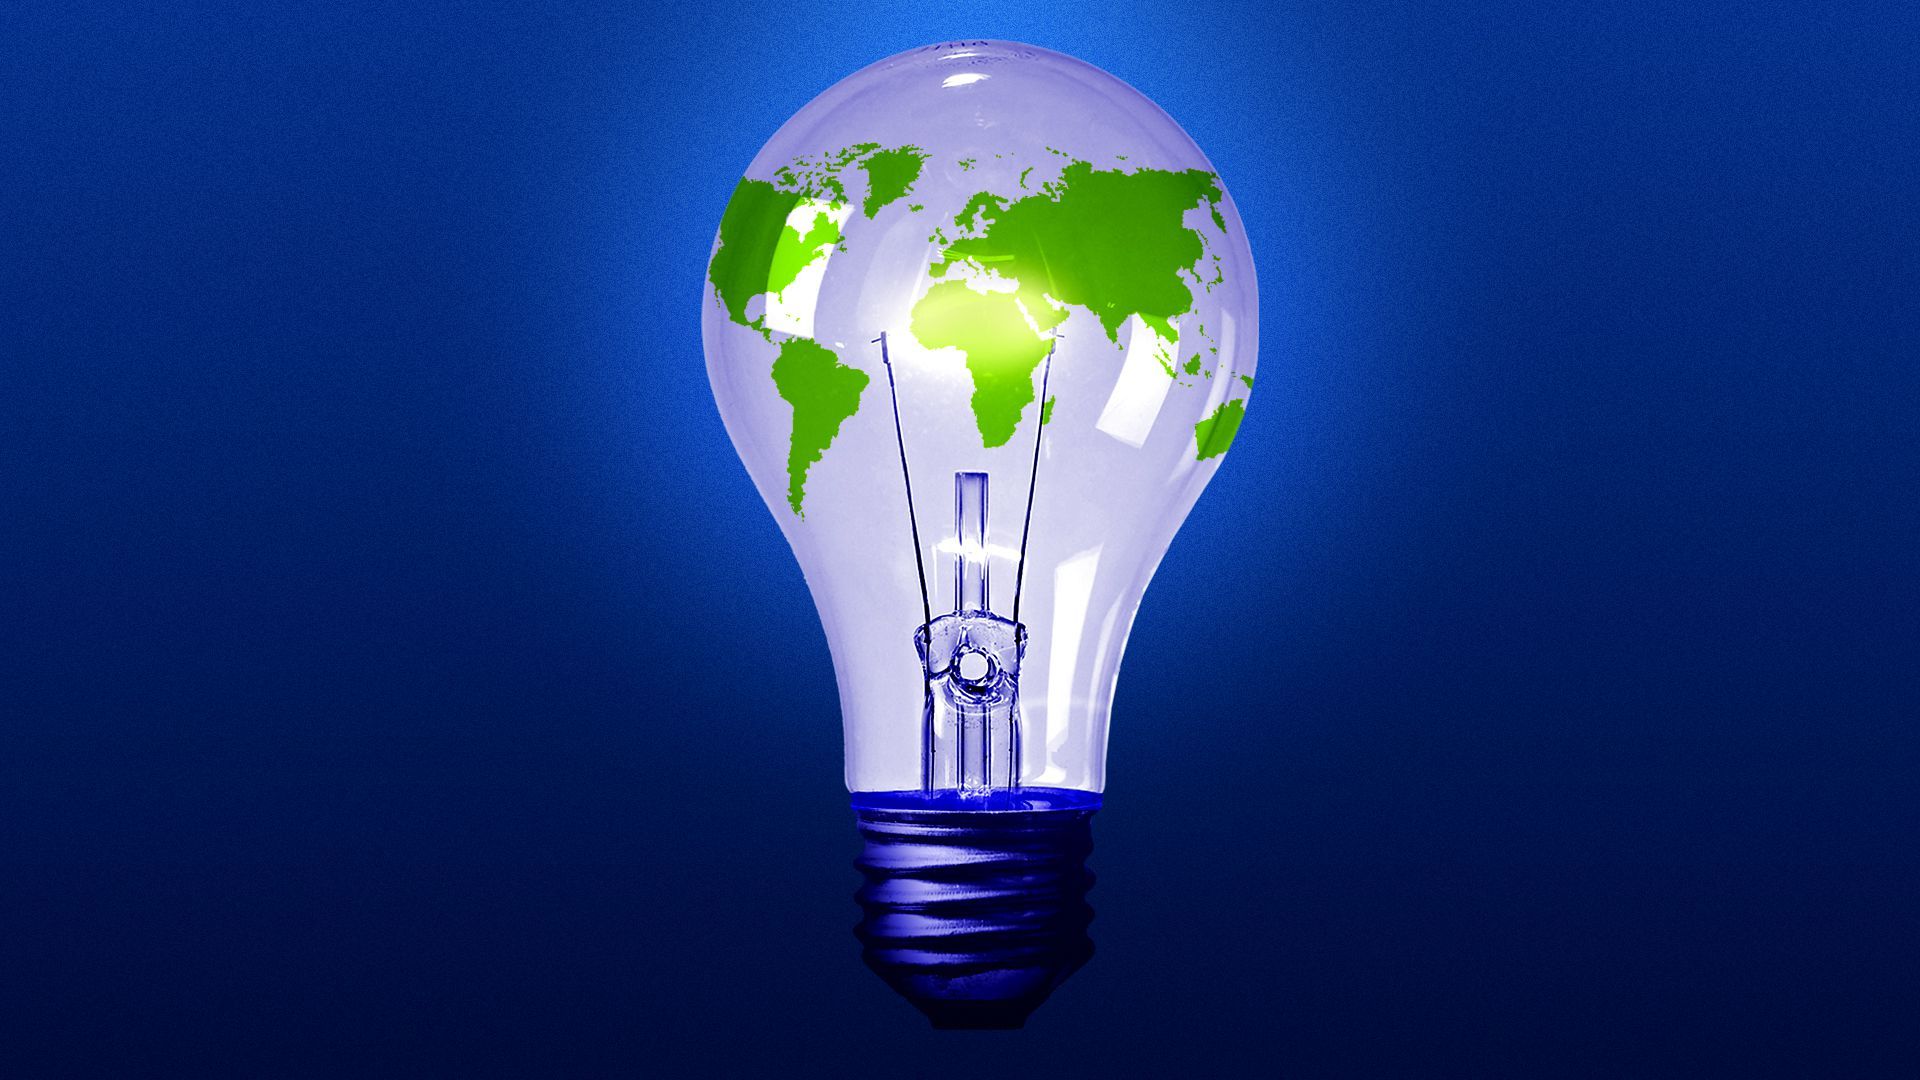 Illustration of a lightbulb with a map of the earth on it